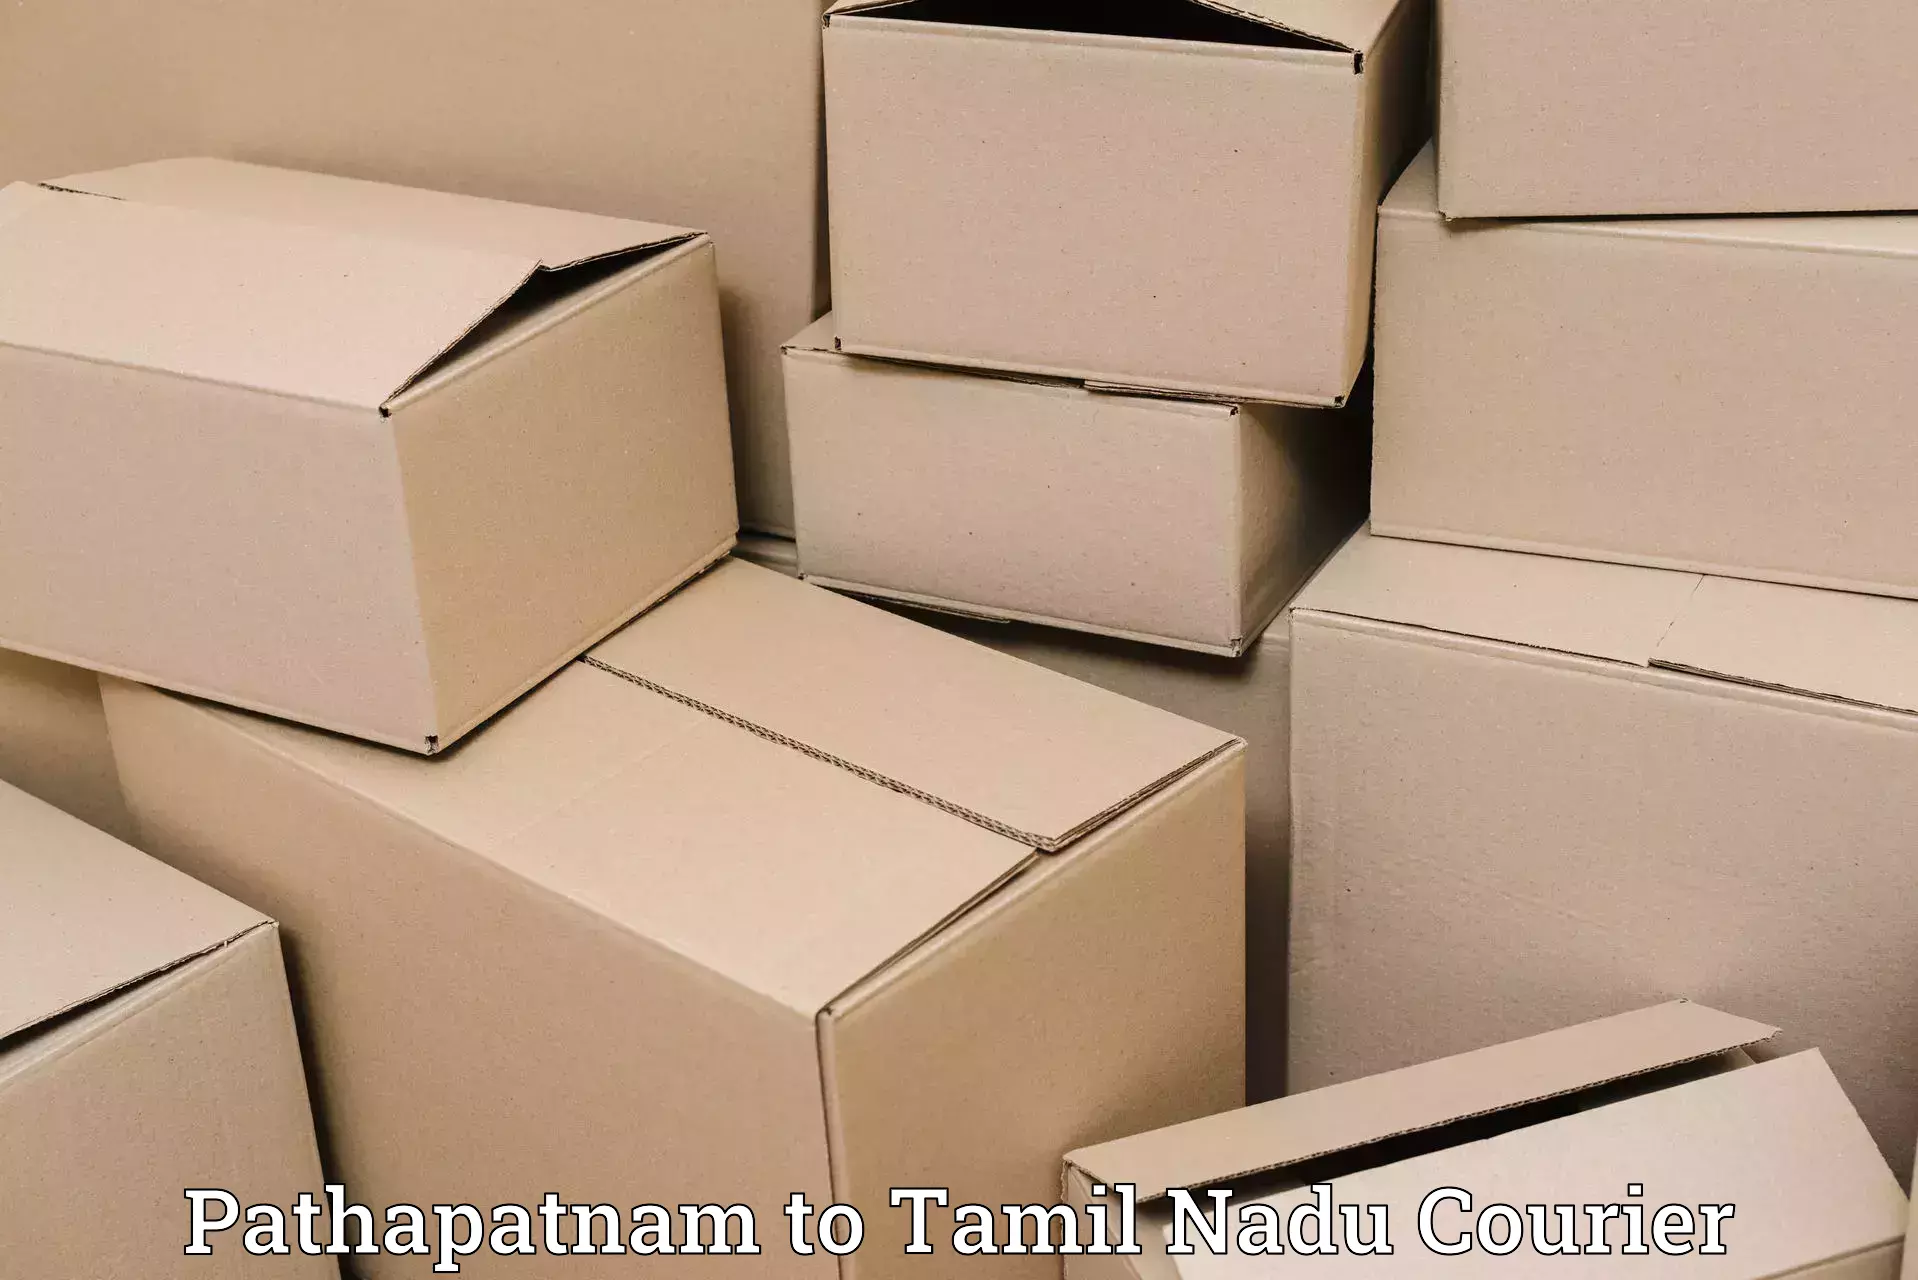 Sustainable delivery practices Pathapatnam to Tindivanam